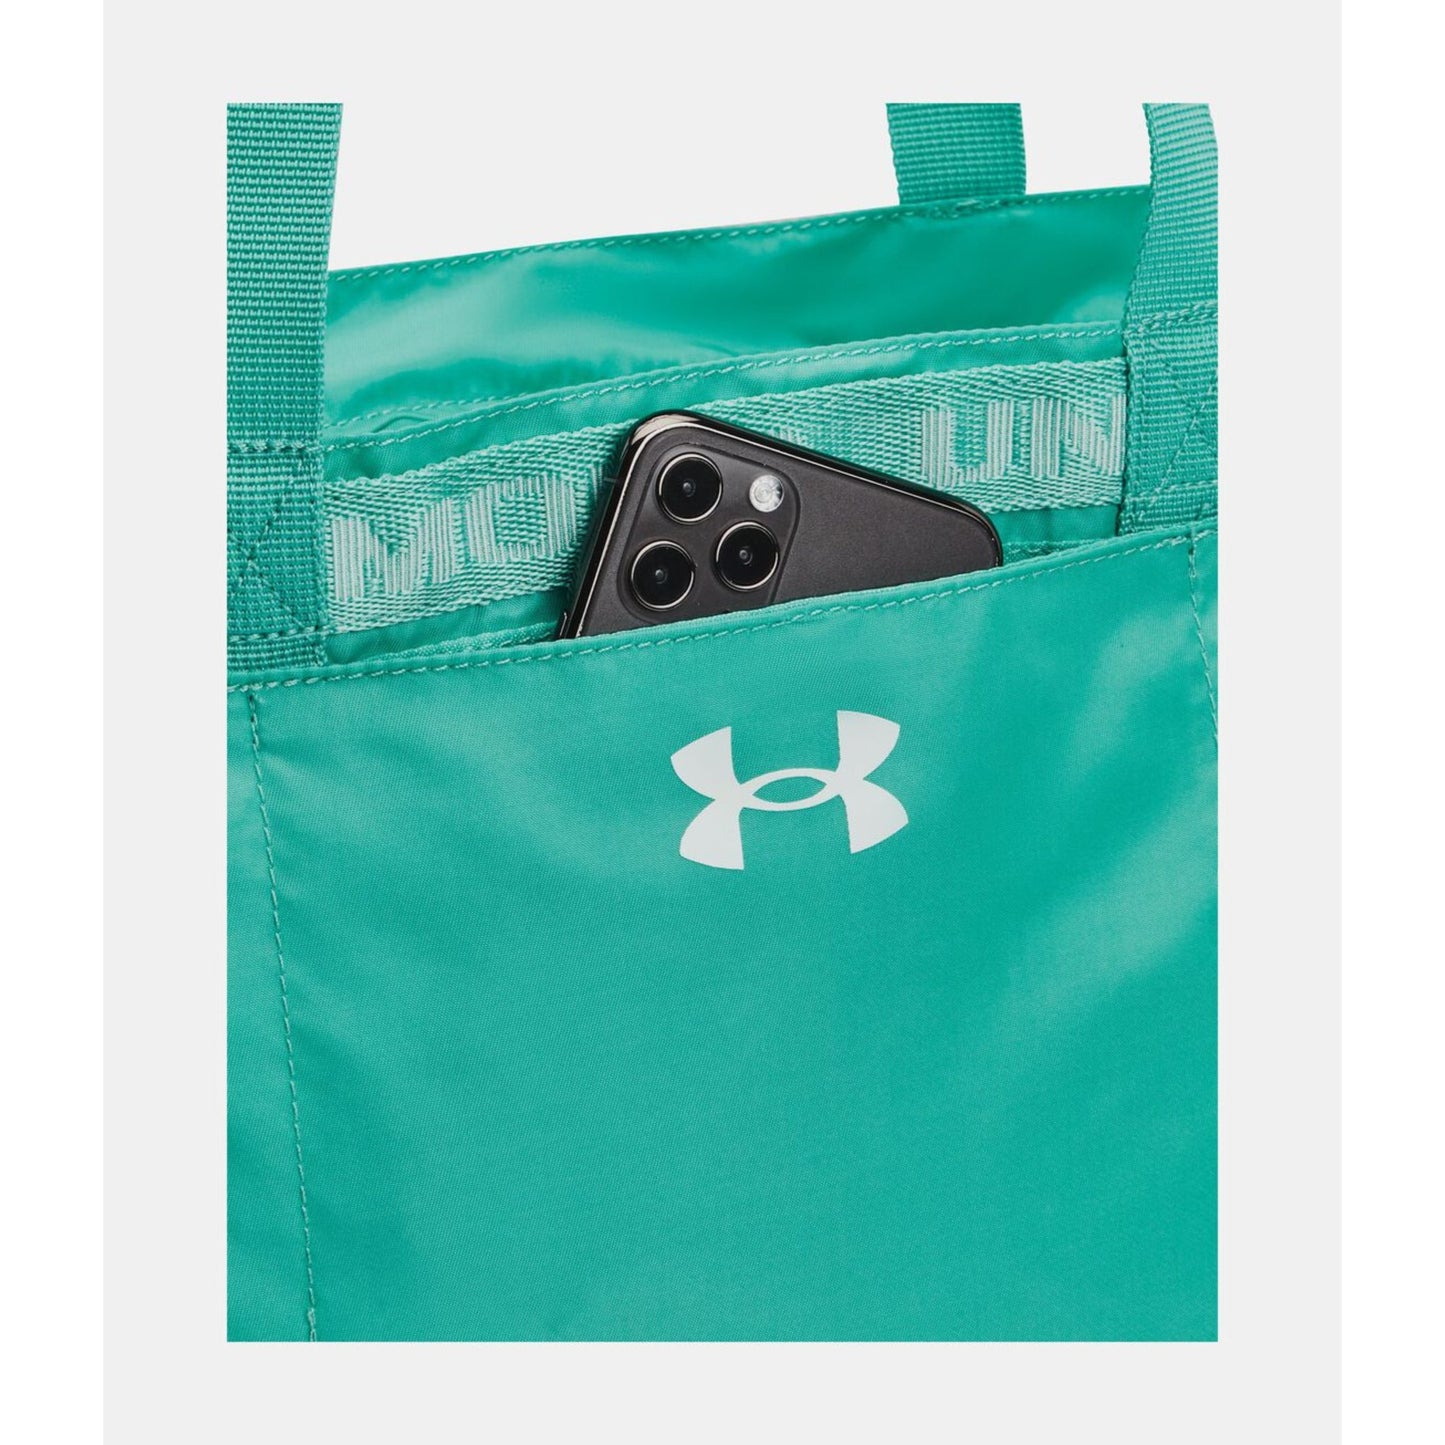 Under Armour-Under Armour Women's UA Favorite Tote Bag (Surgical Green) - Brandat Outlet